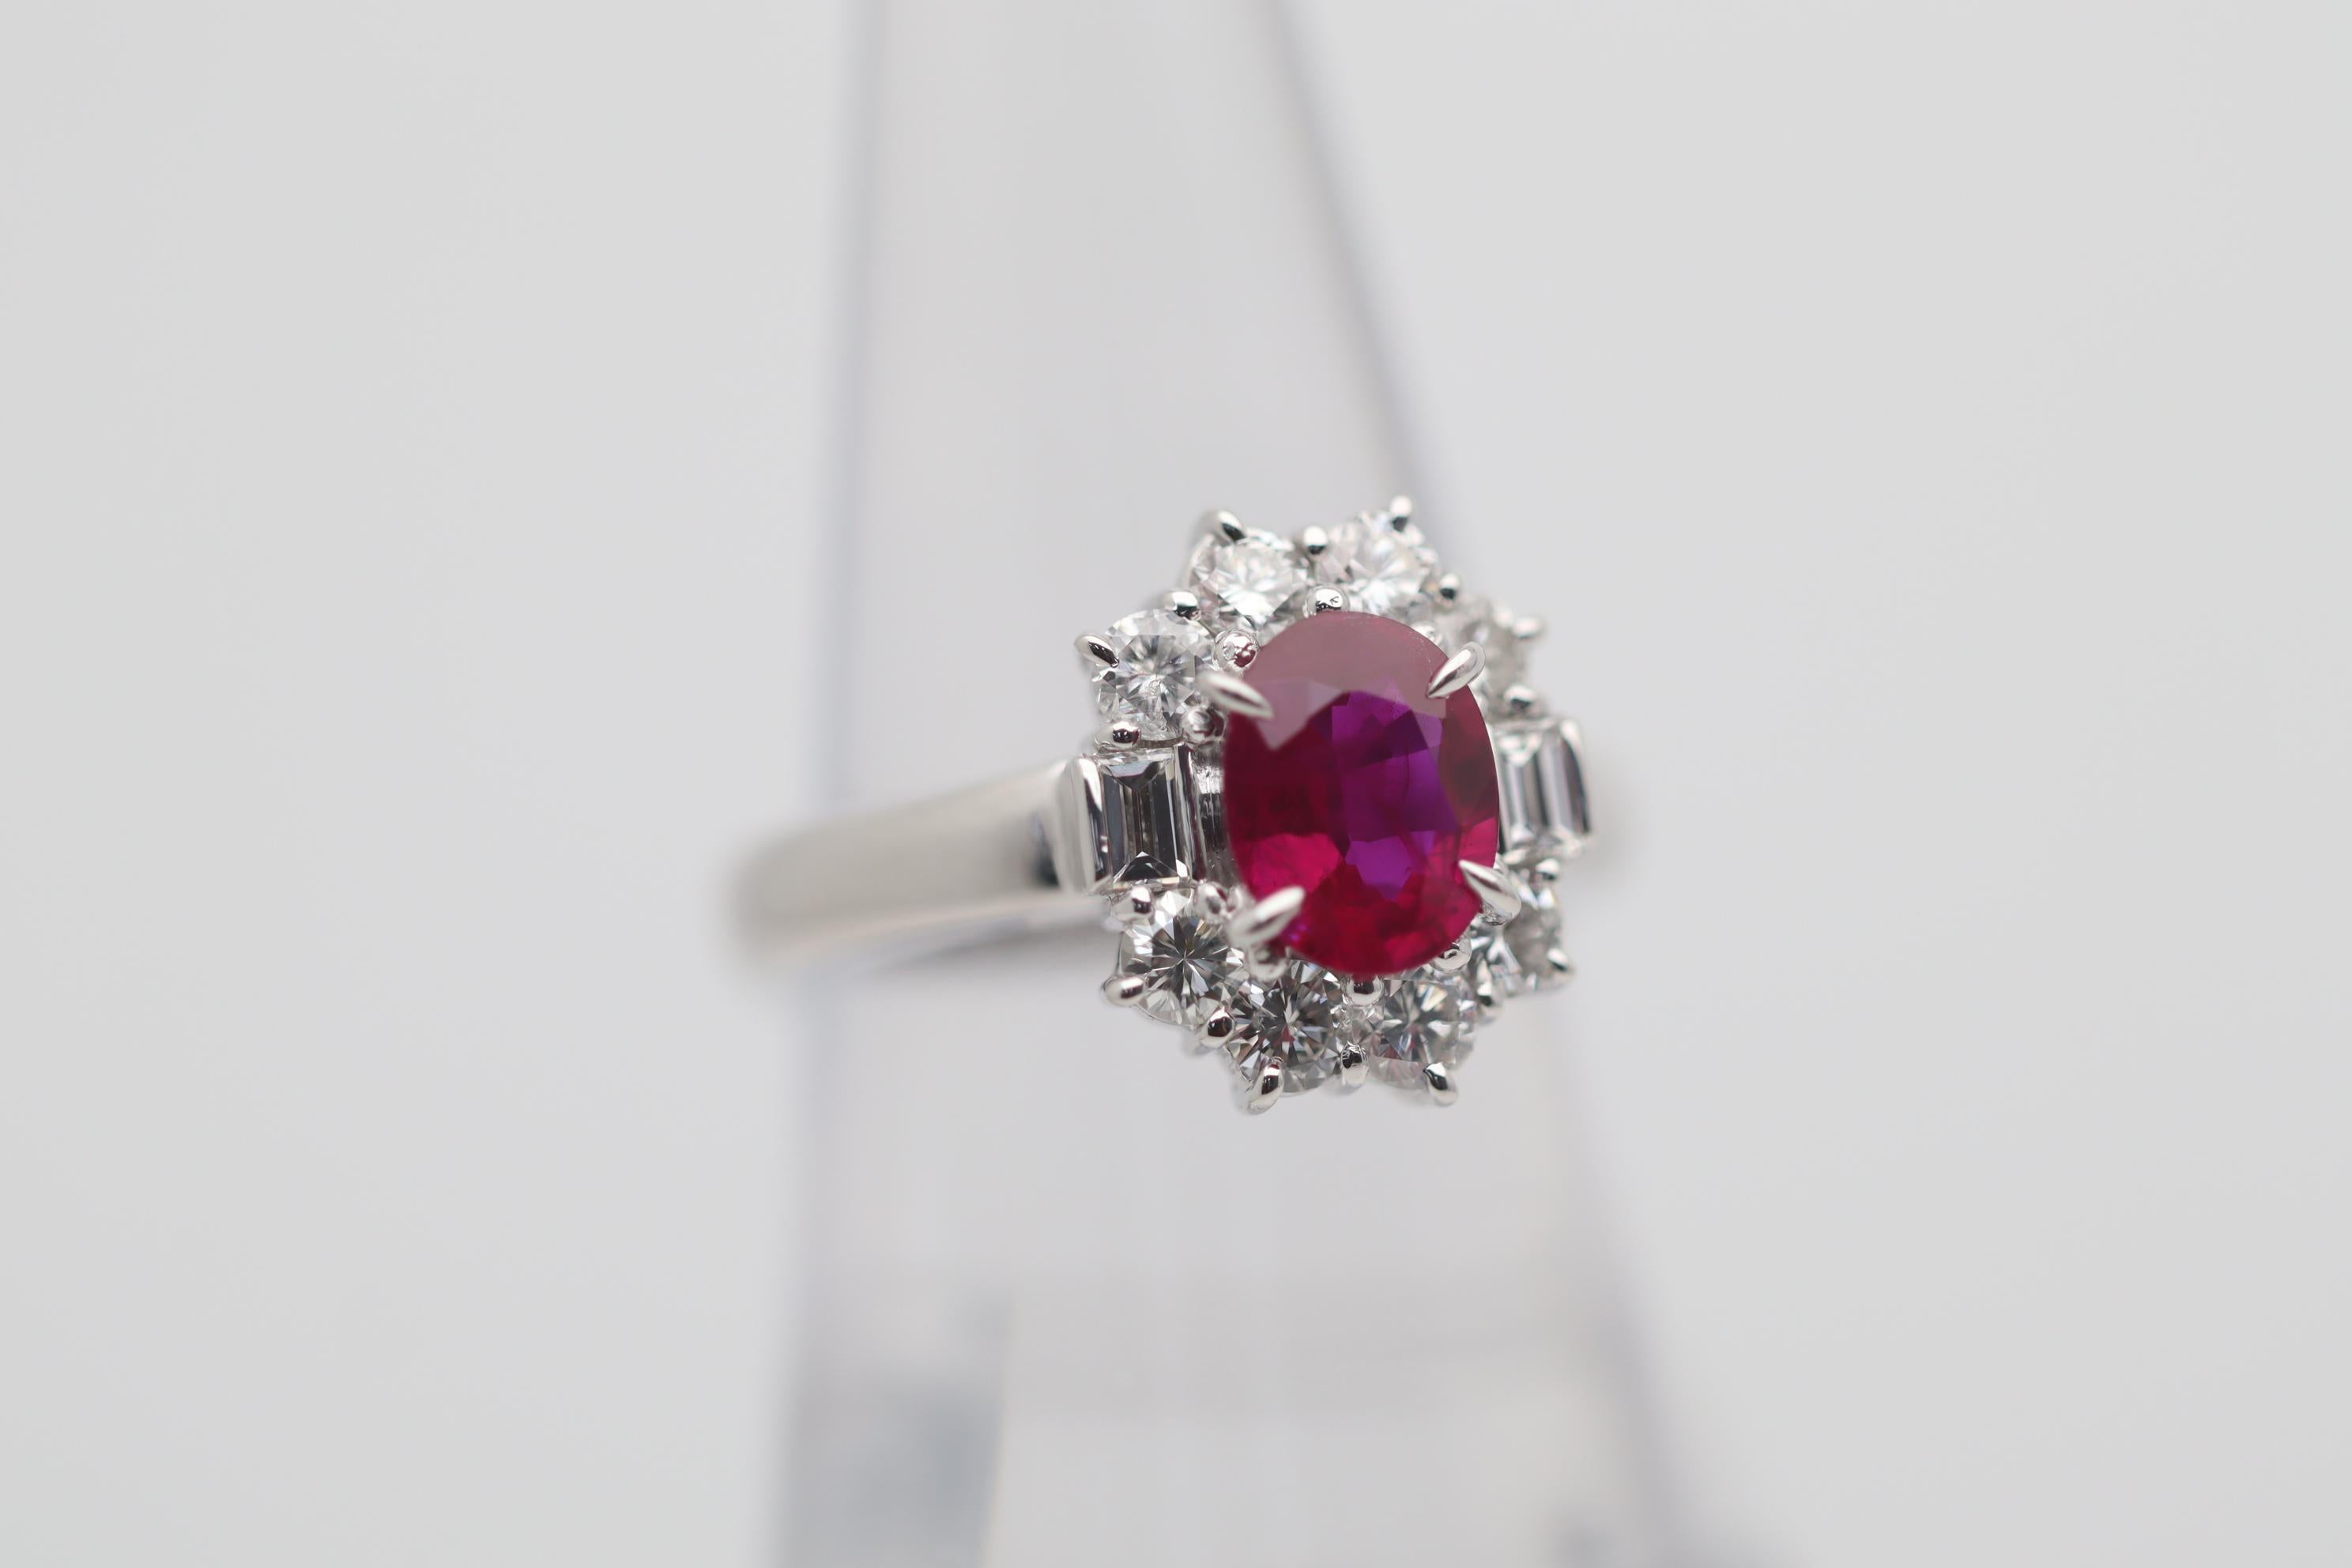 Oval Cut 1.17 Carat Burmese Ruby Diamond Platinum Ring, GIA Certified For Sale